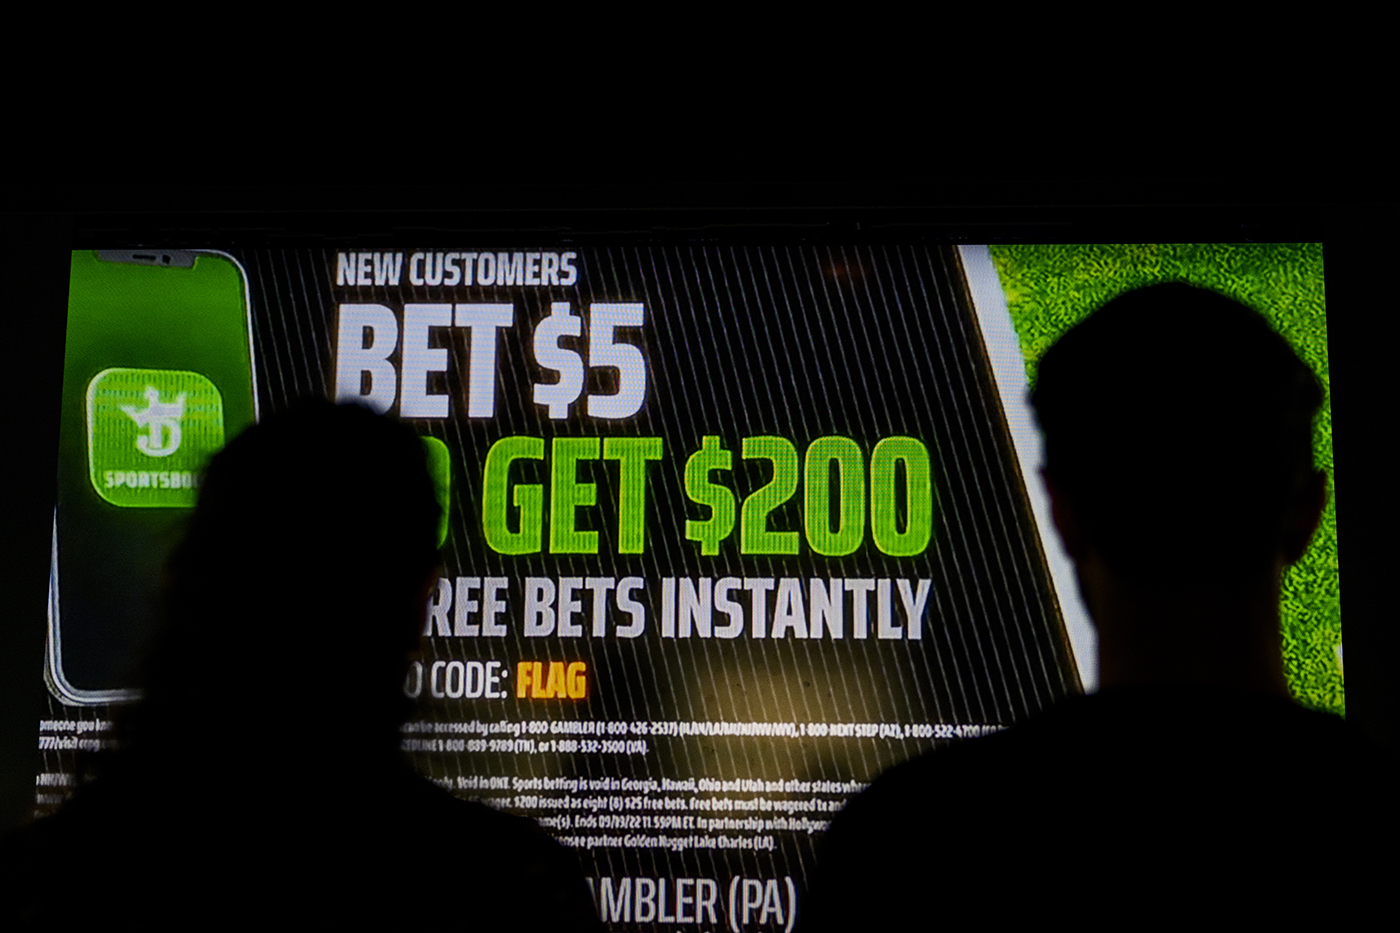 Silhouette of two people looking at a sports betting ad